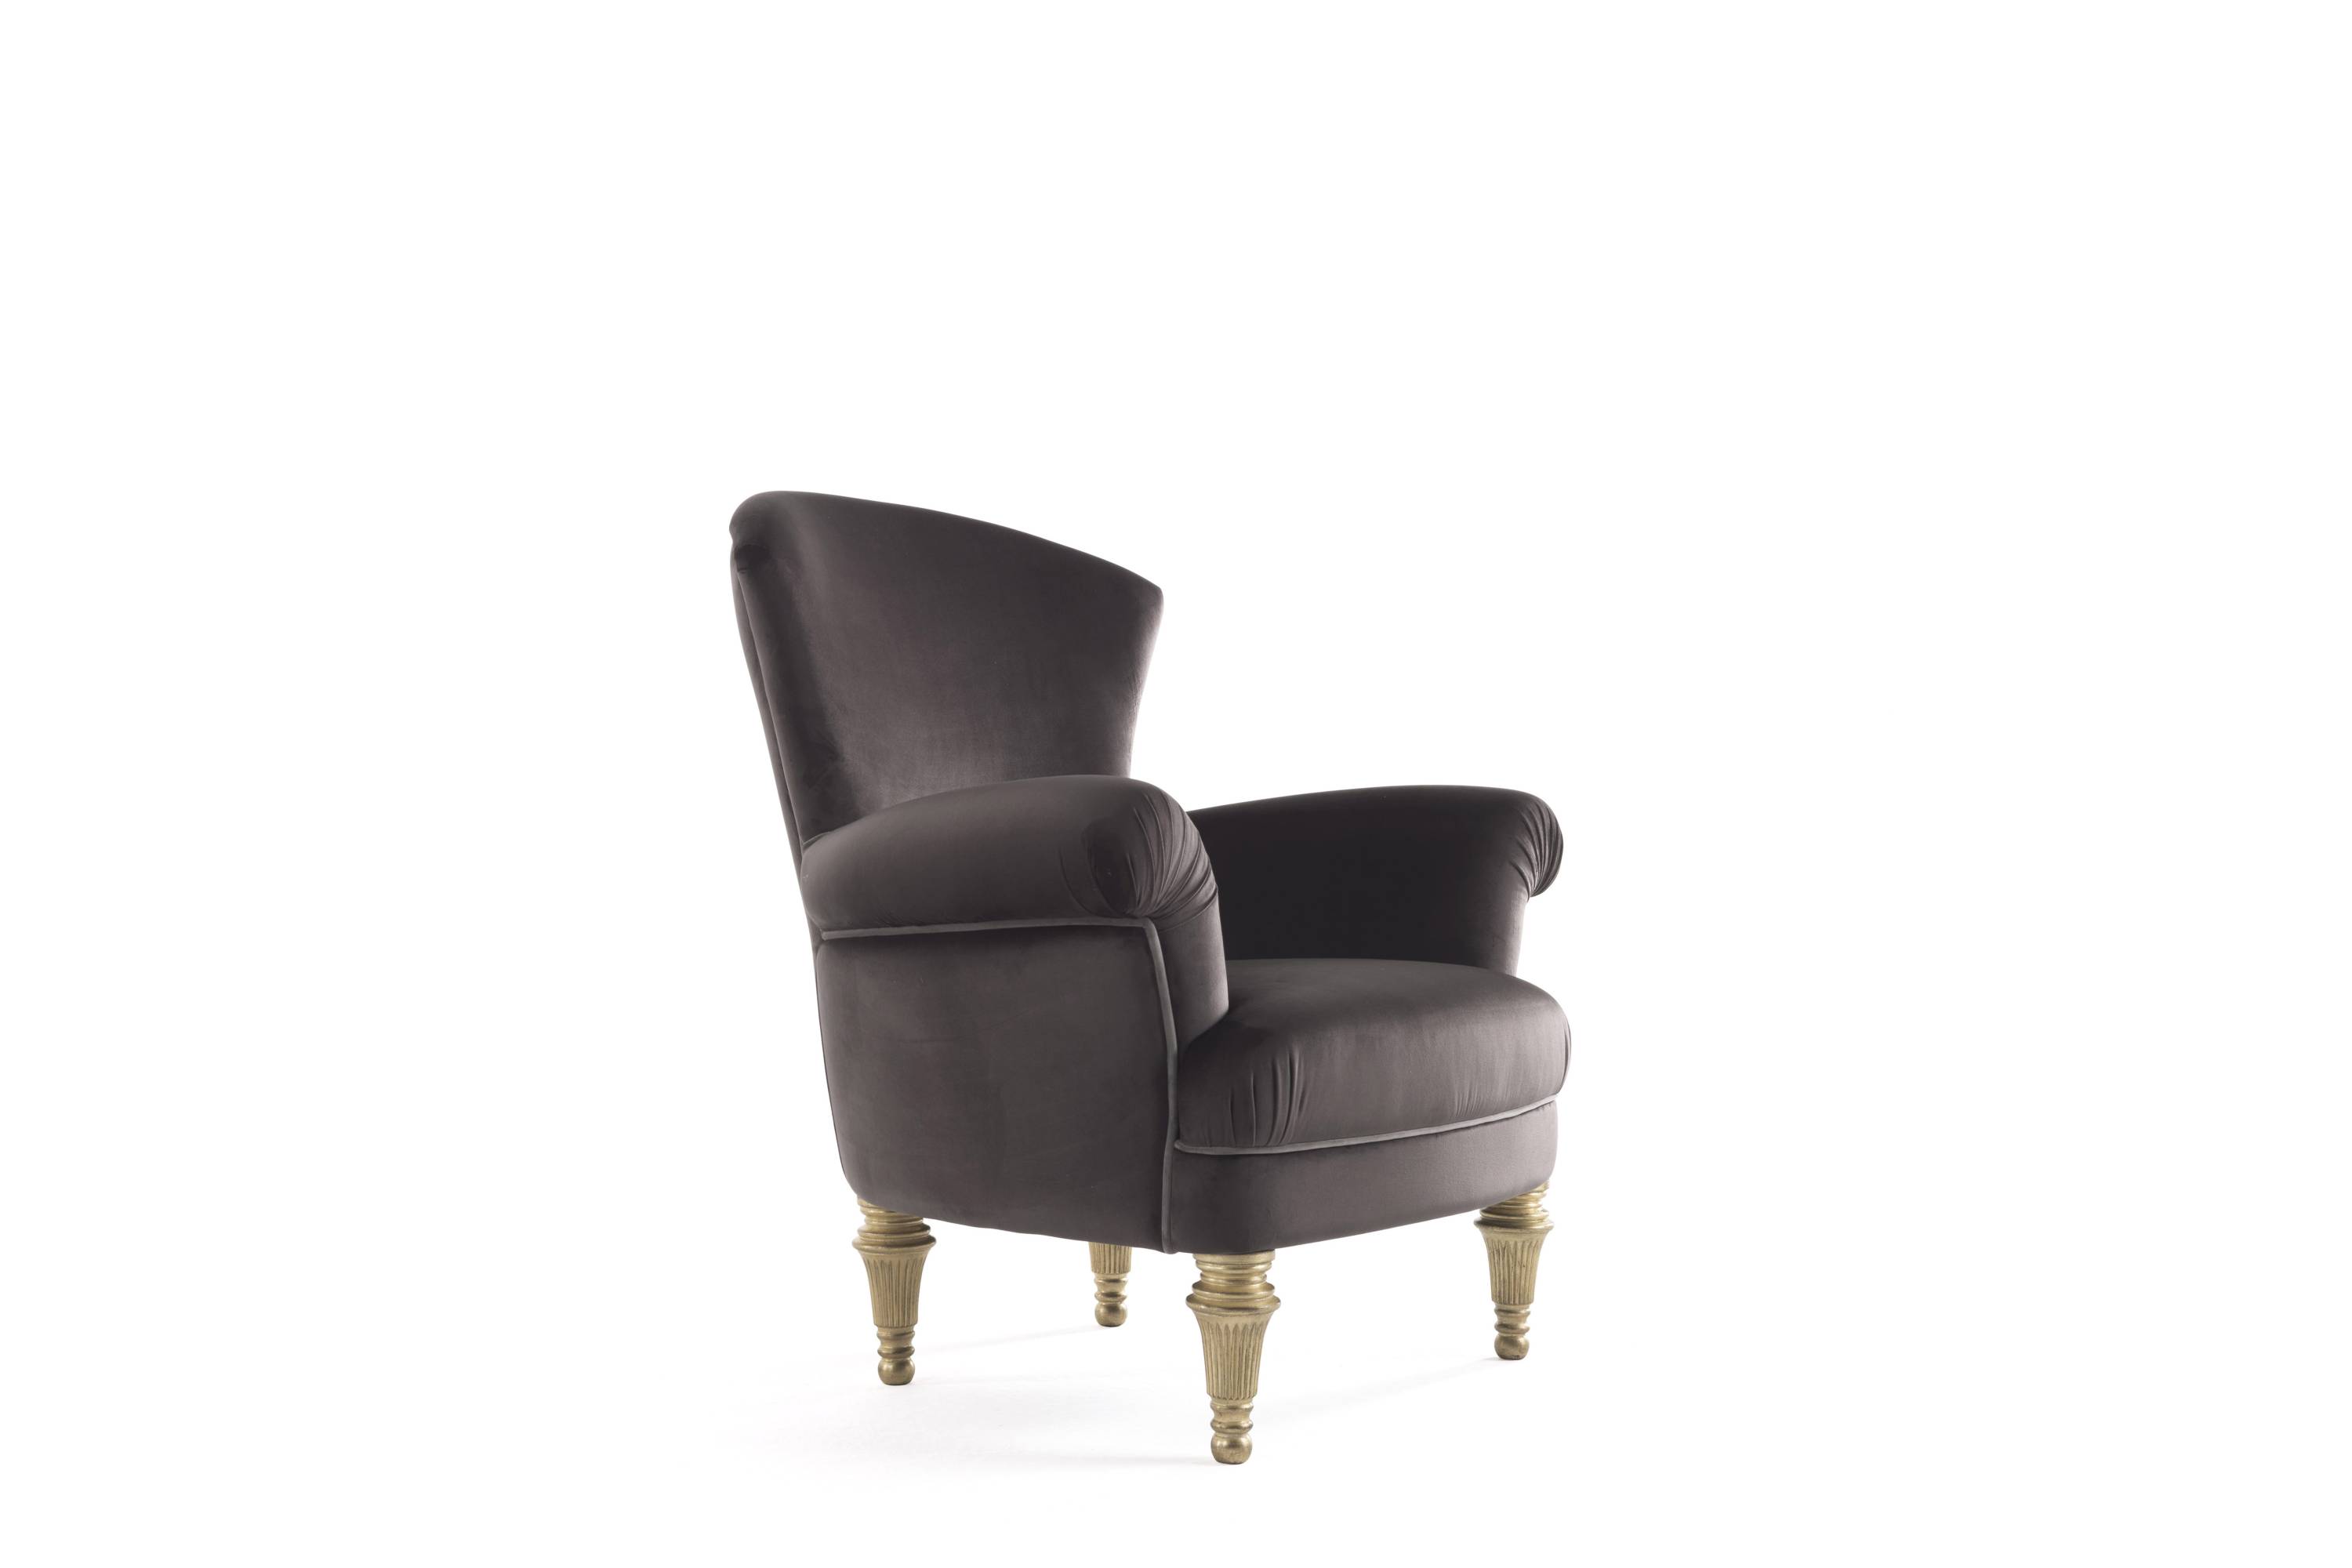 RIVOLI armchair – Transform your space with luxury Made in Italy classic armchairs of Oro Bianco collection.